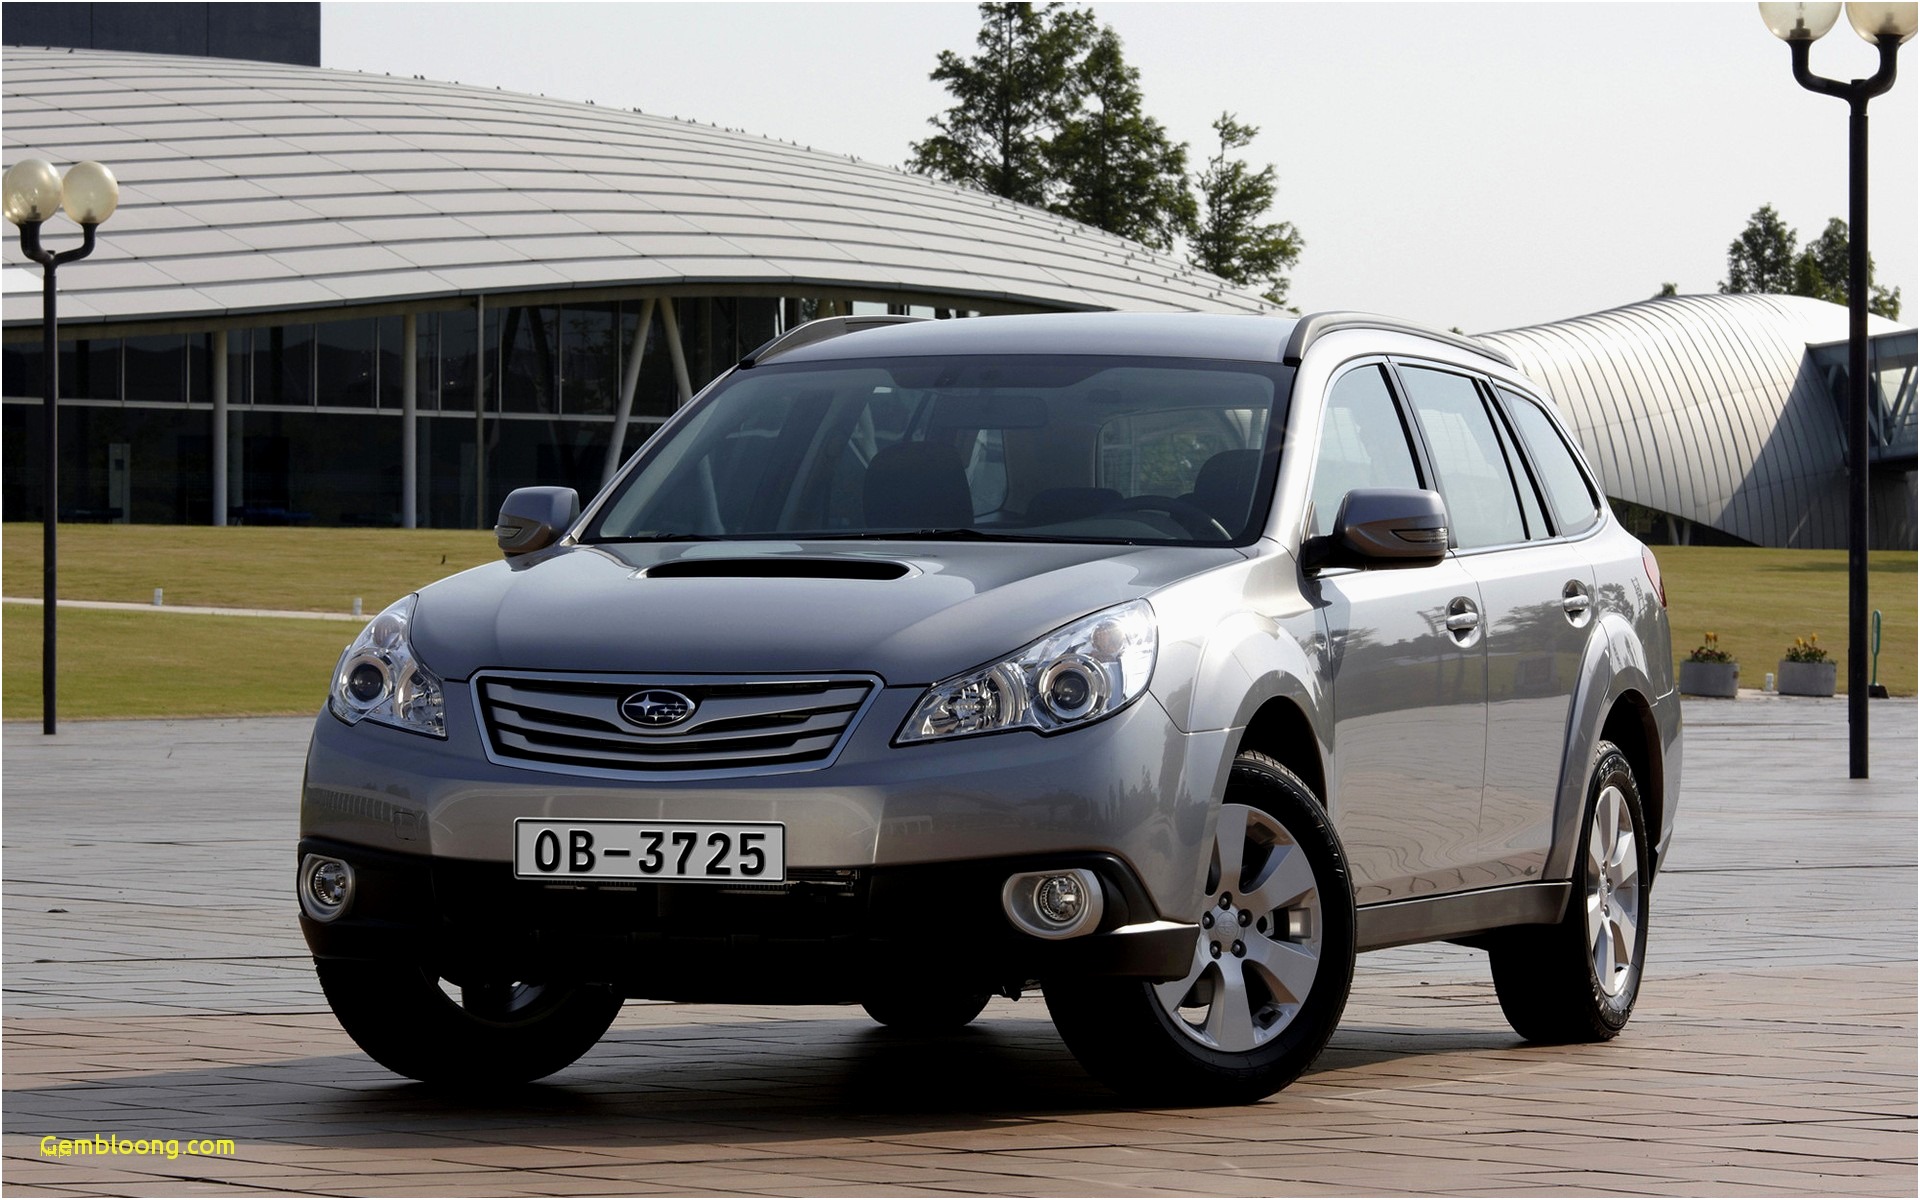 Hd Wallpapers Android Awesome Hd Wallpapers For Android - Subaru Outback Boxer Diesel , HD Wallpaper & Backgrounds